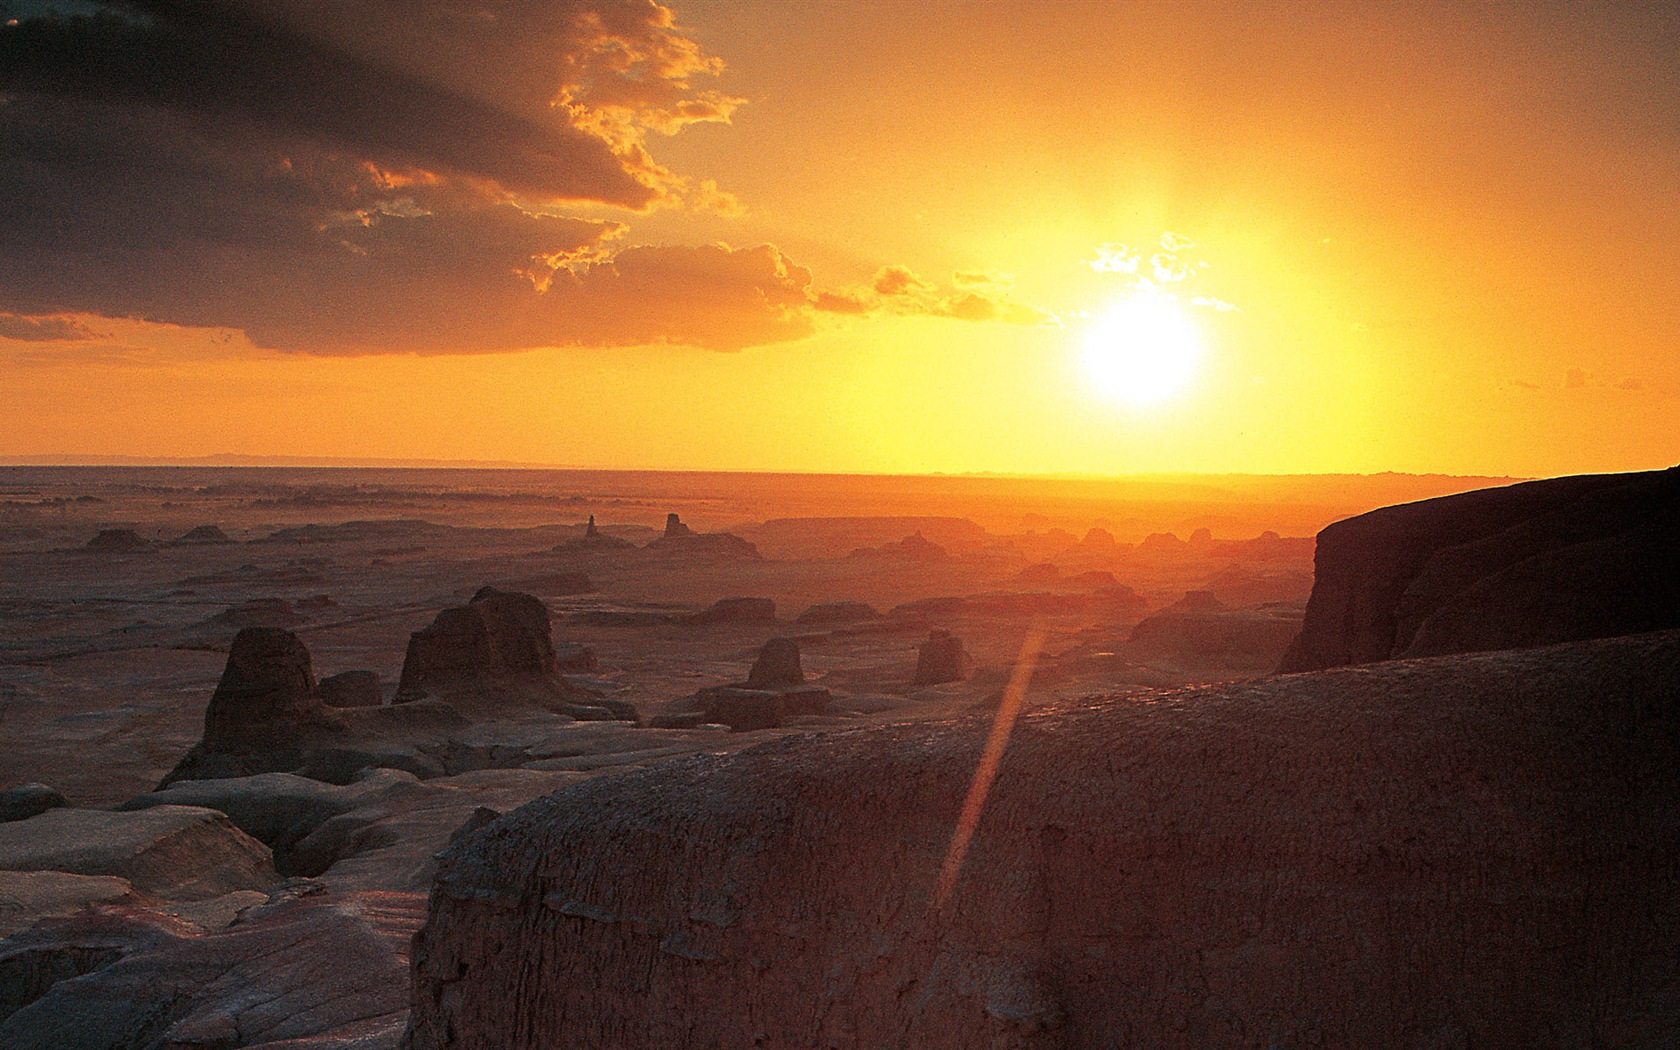 Hot and arid deserts, Windows 8 panoramic widescreen wallpapers #12 - 1680x1050